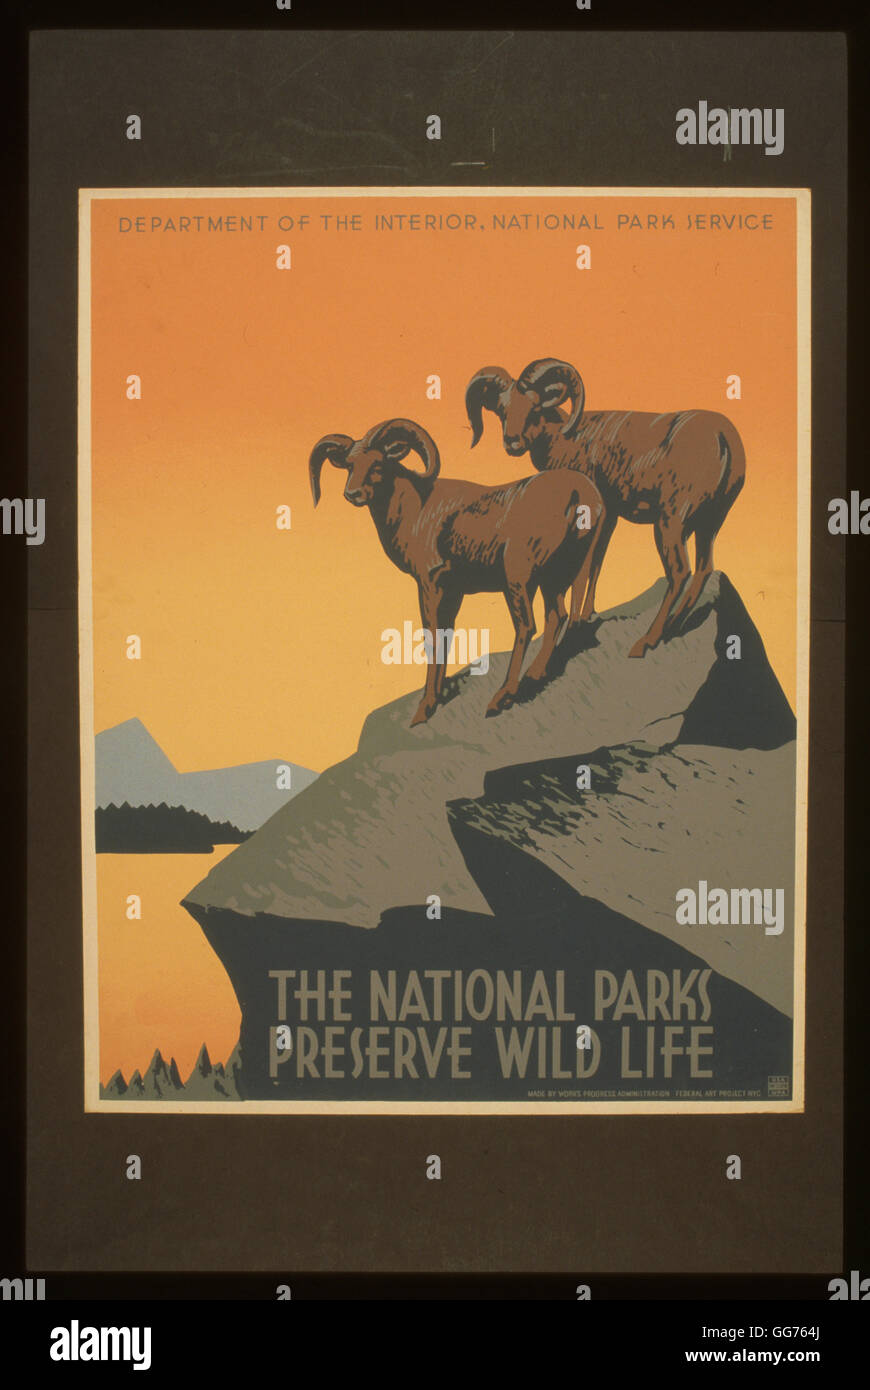 Poster for National Park Service promoting travel to national parks, showing two bighorn sheep. Stock Photo